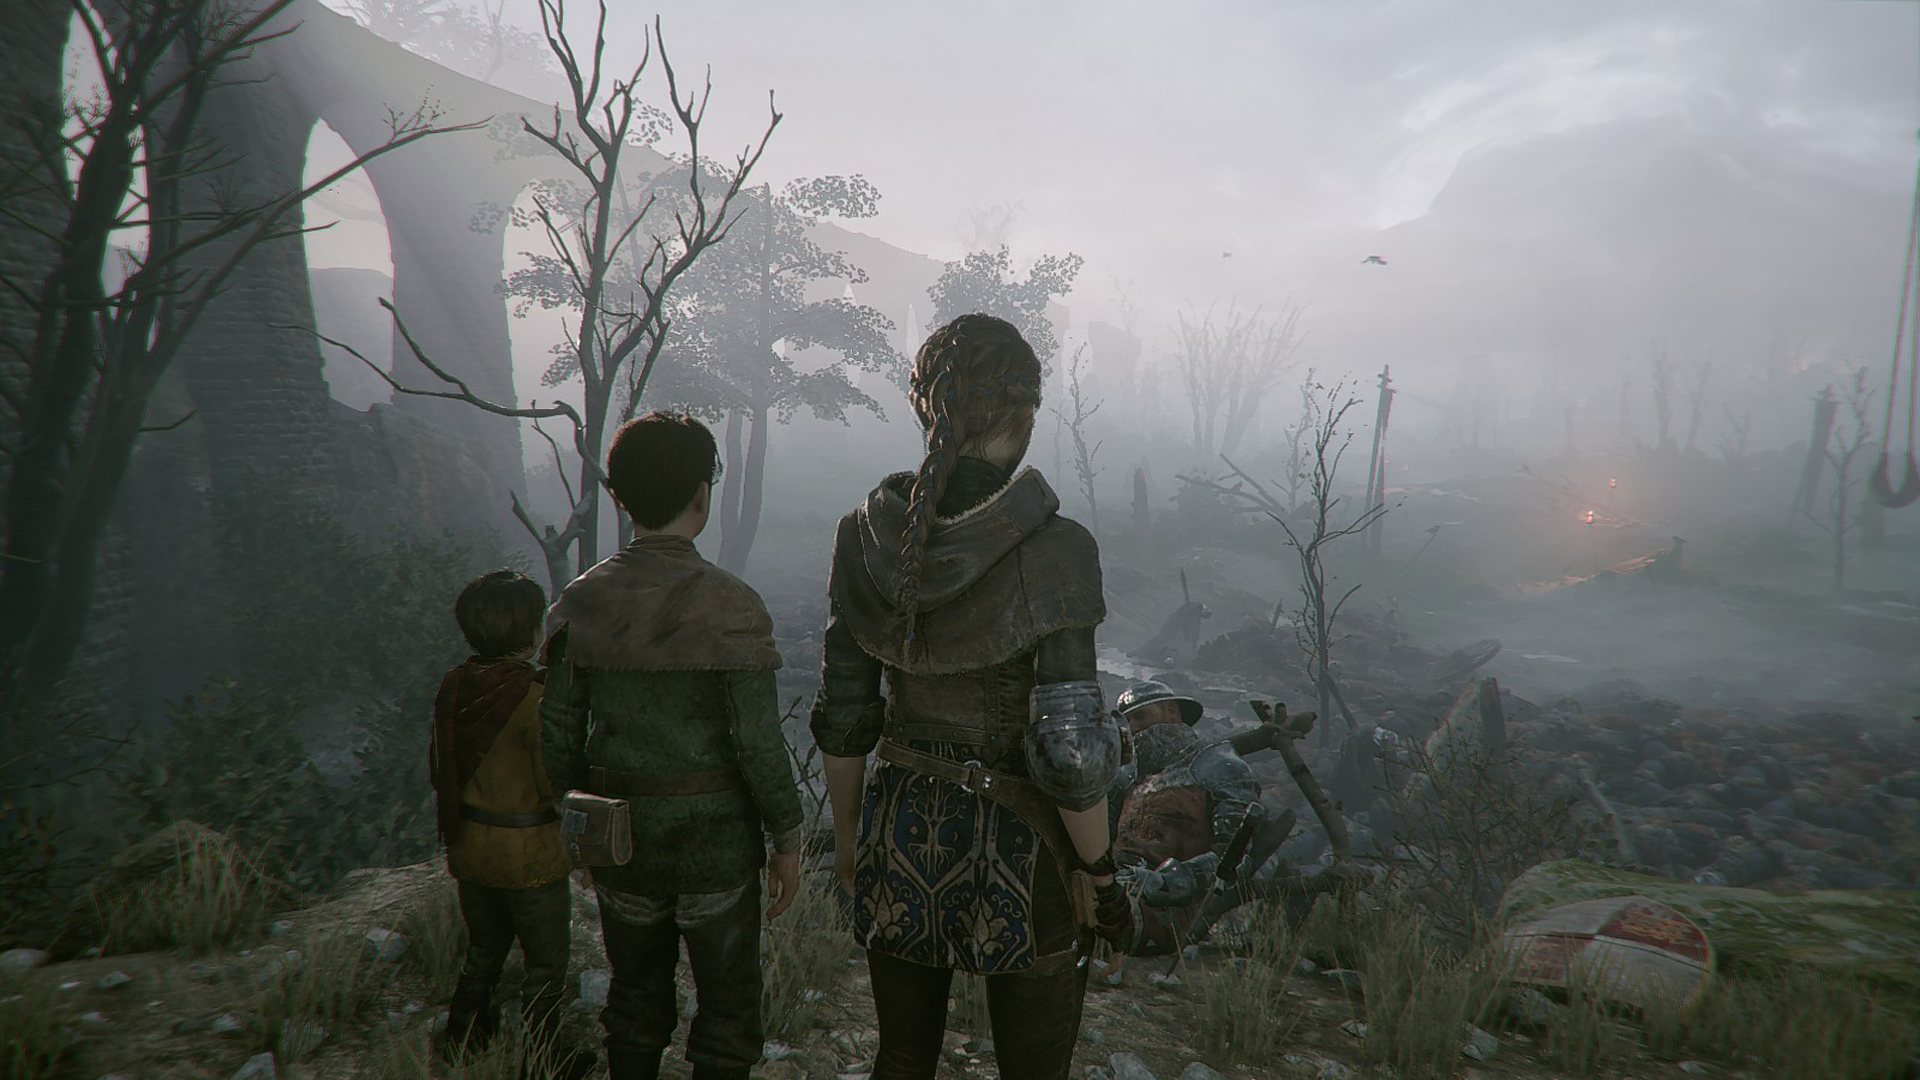 A plague tale: innocence is one of the most engaging and